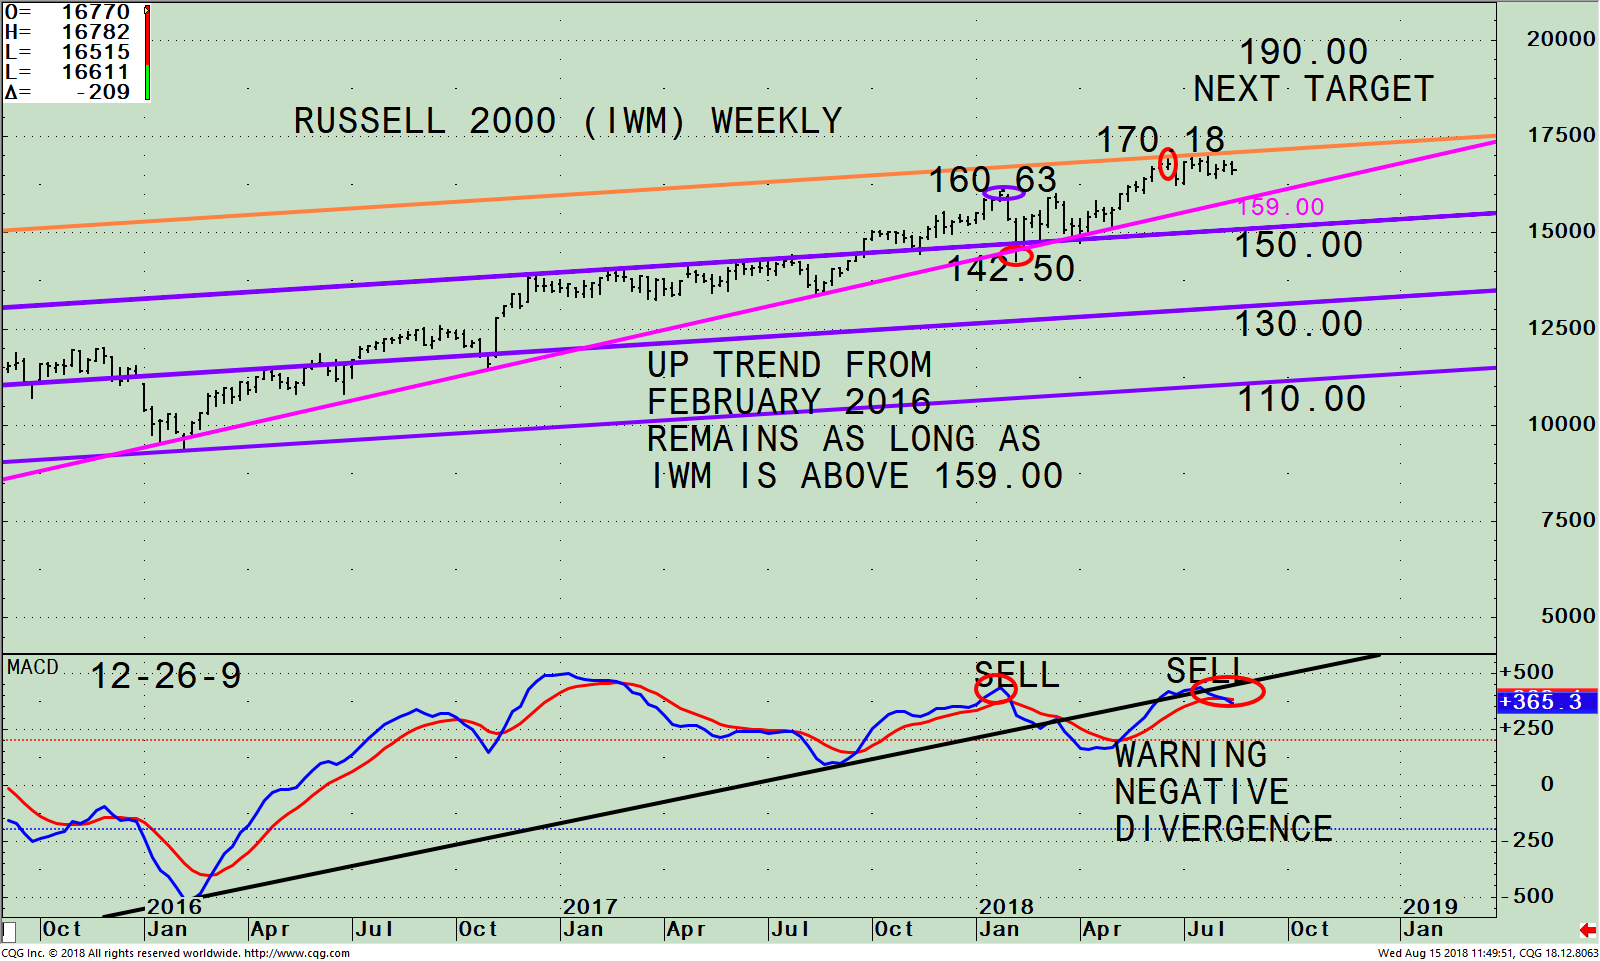 Track the Price of The Russell 2000 (IWM) For Guidance »